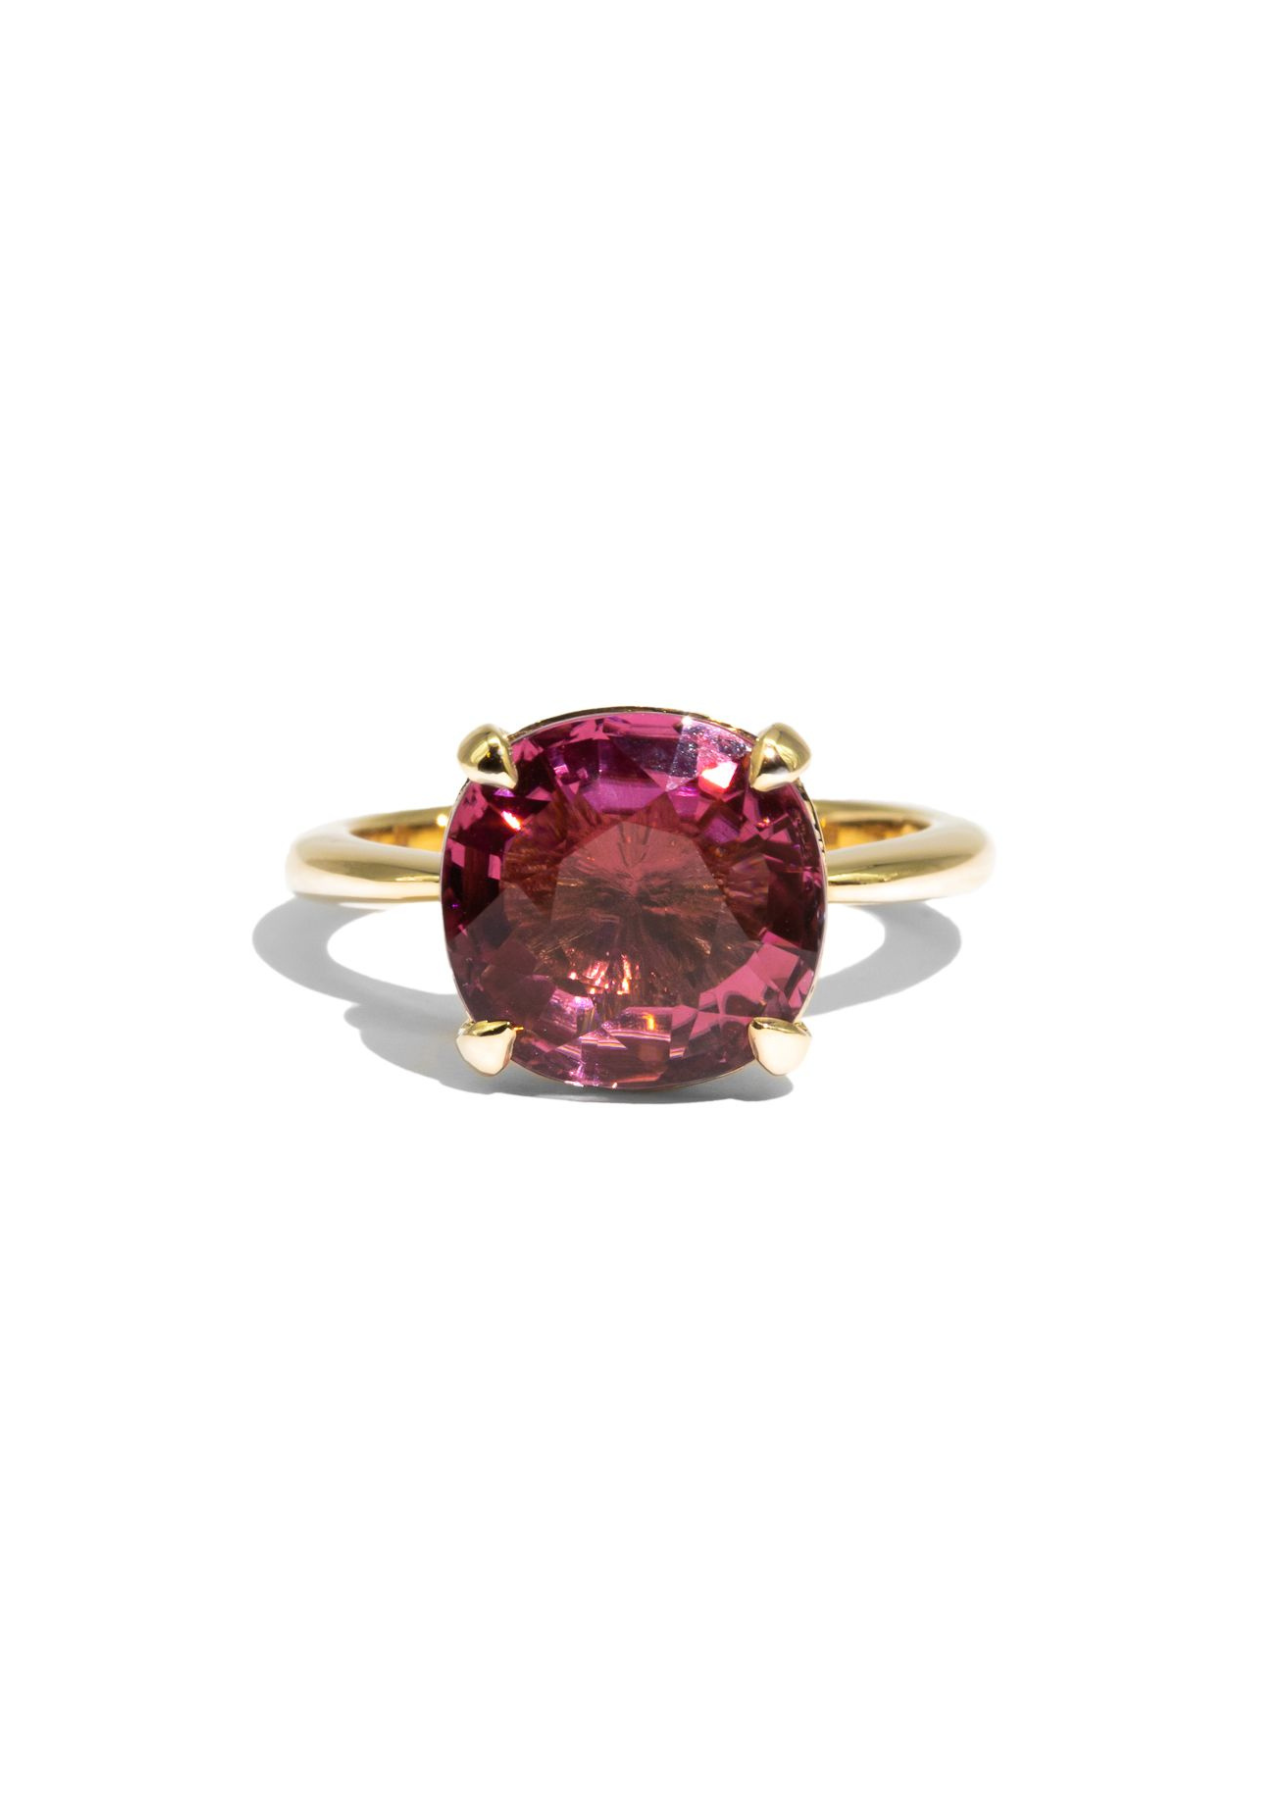 The June Ring with 5.05ct Round Tourmaline